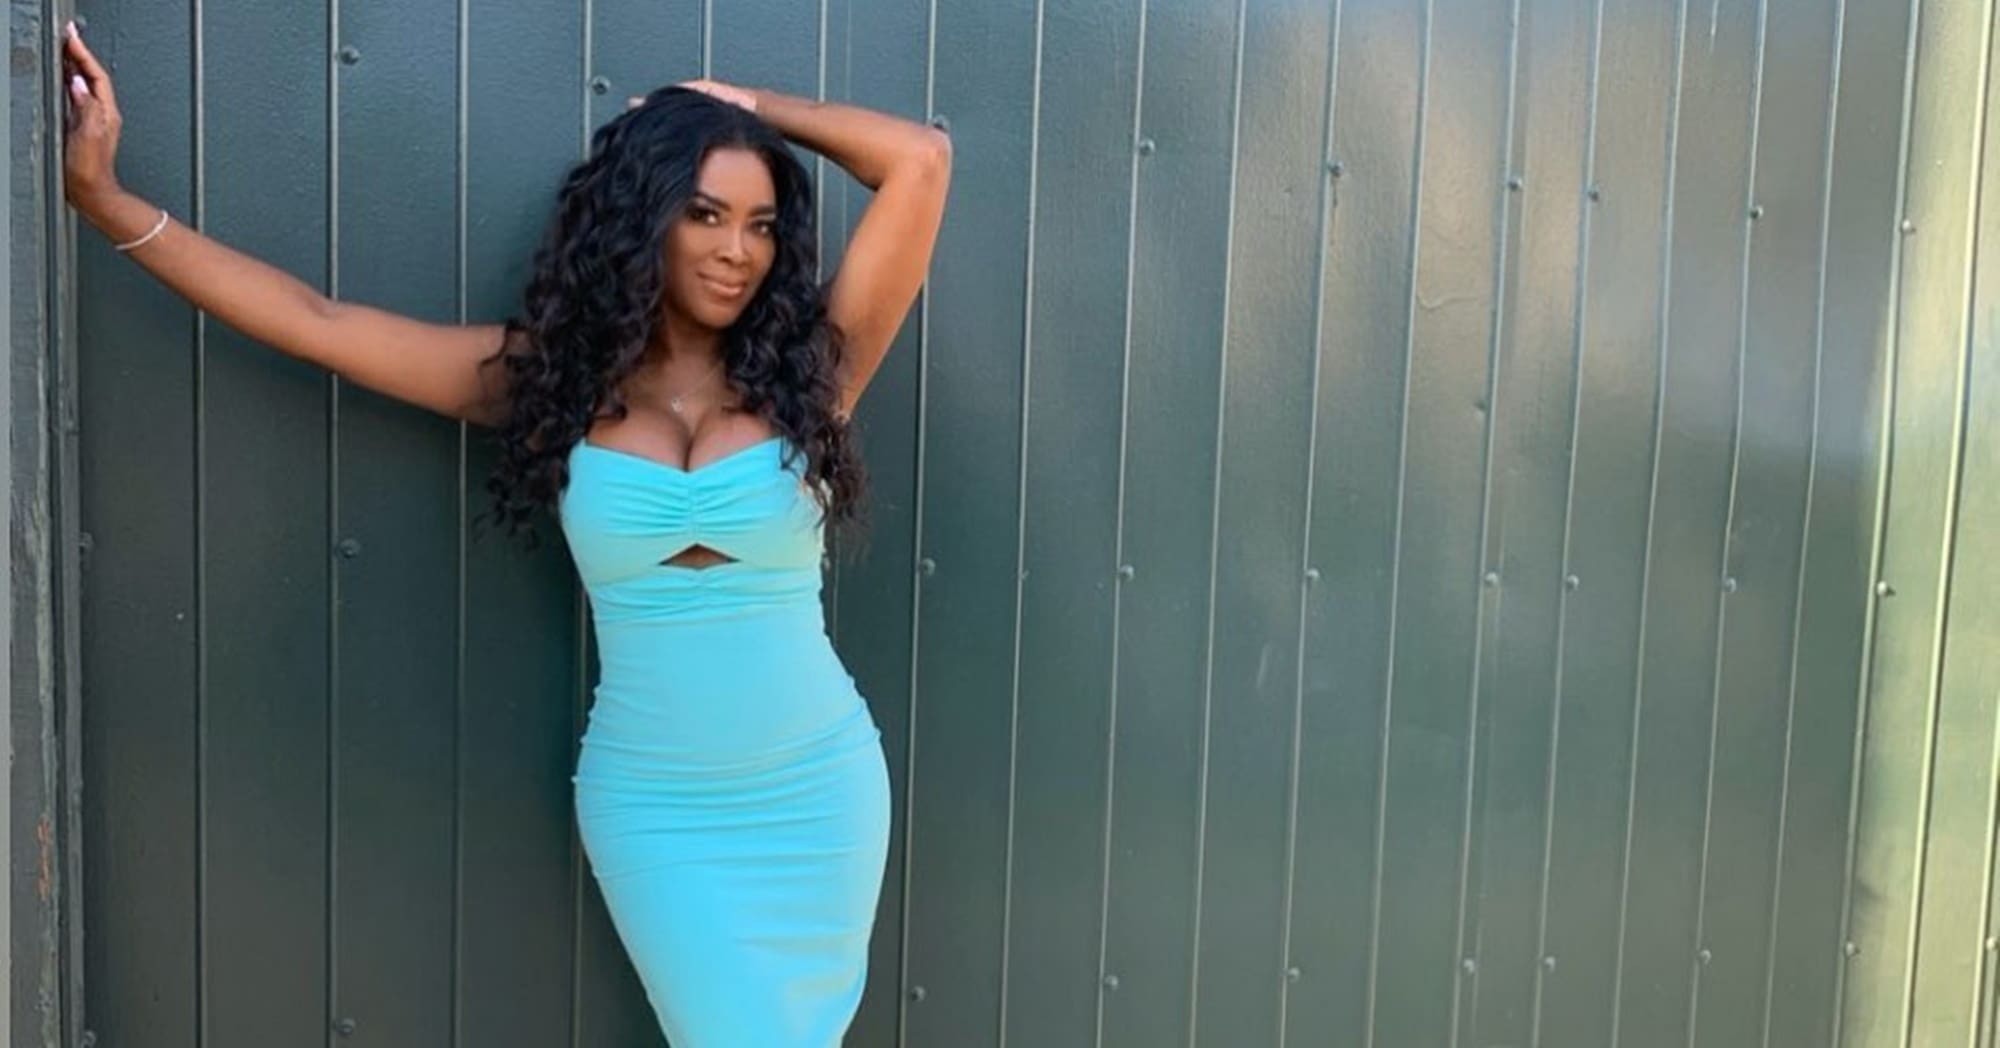 ”kenya-moore-slays-in-tight-dress-picture-and-reveals-if-she-is-thinner-after-giving-birth-to-baby-brooklyn”